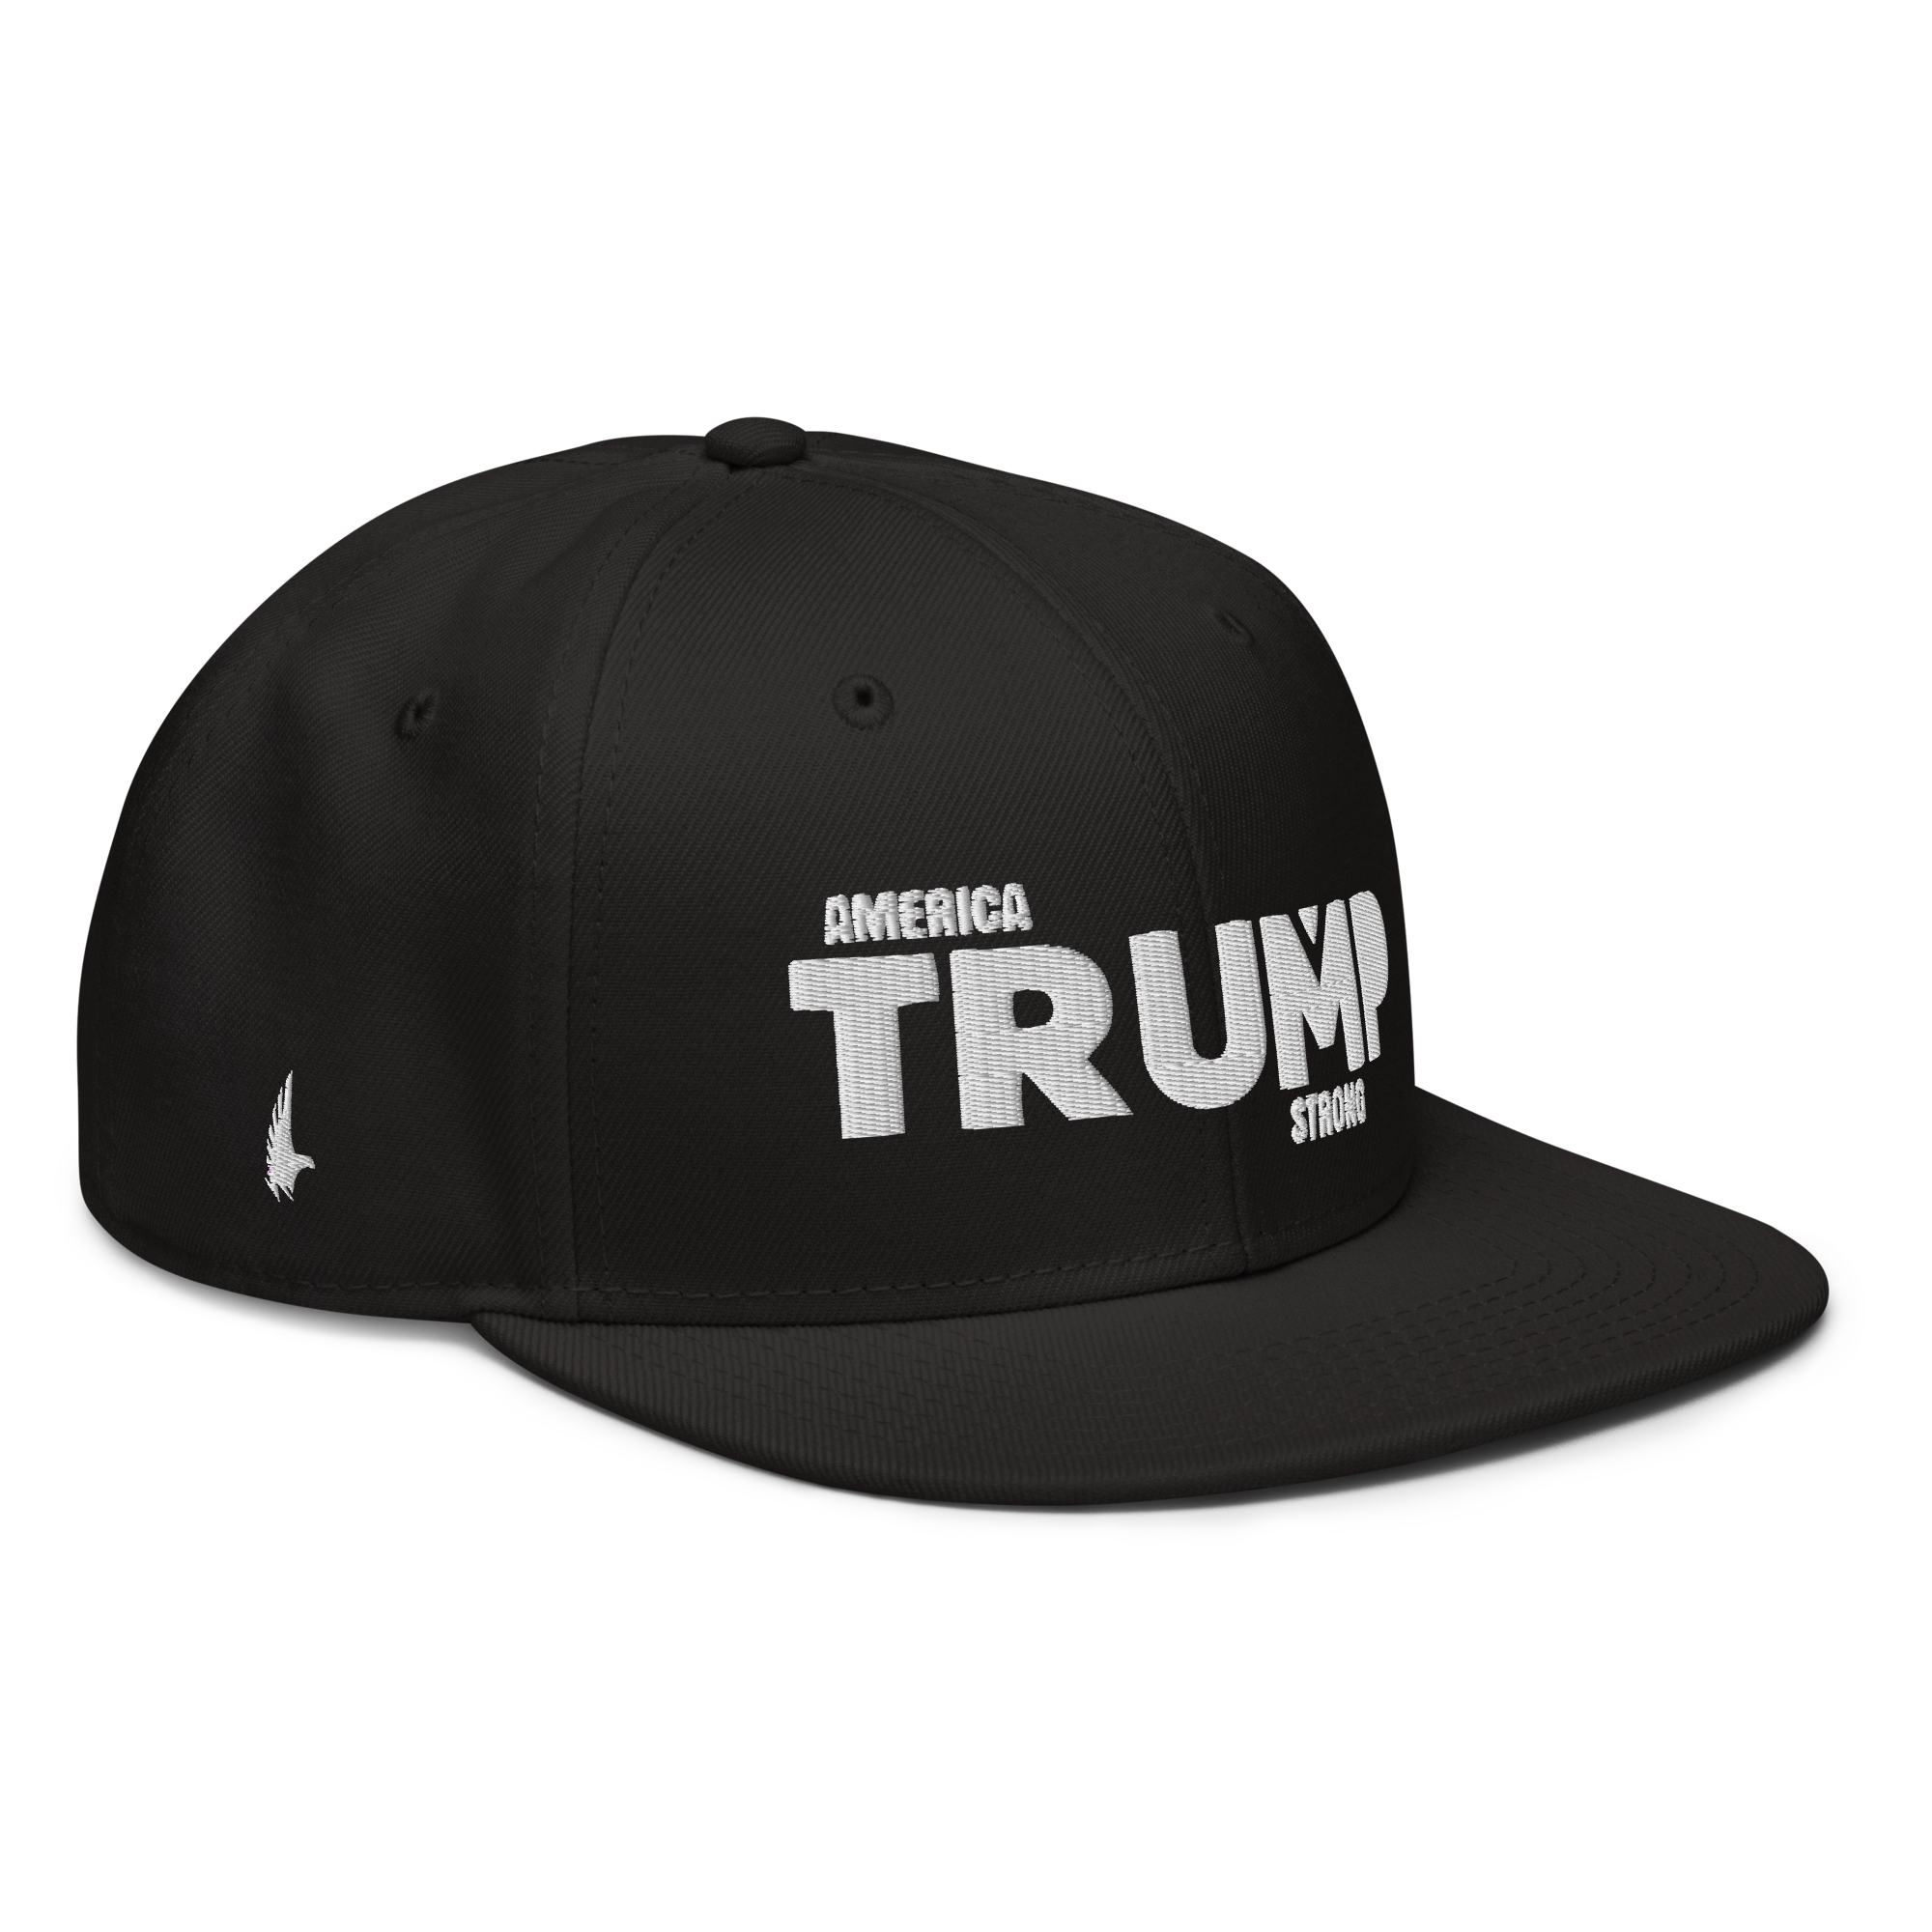 Loyalty Vibes America Trump Strong Snapback Hat Black One size - Loyalty Vibes